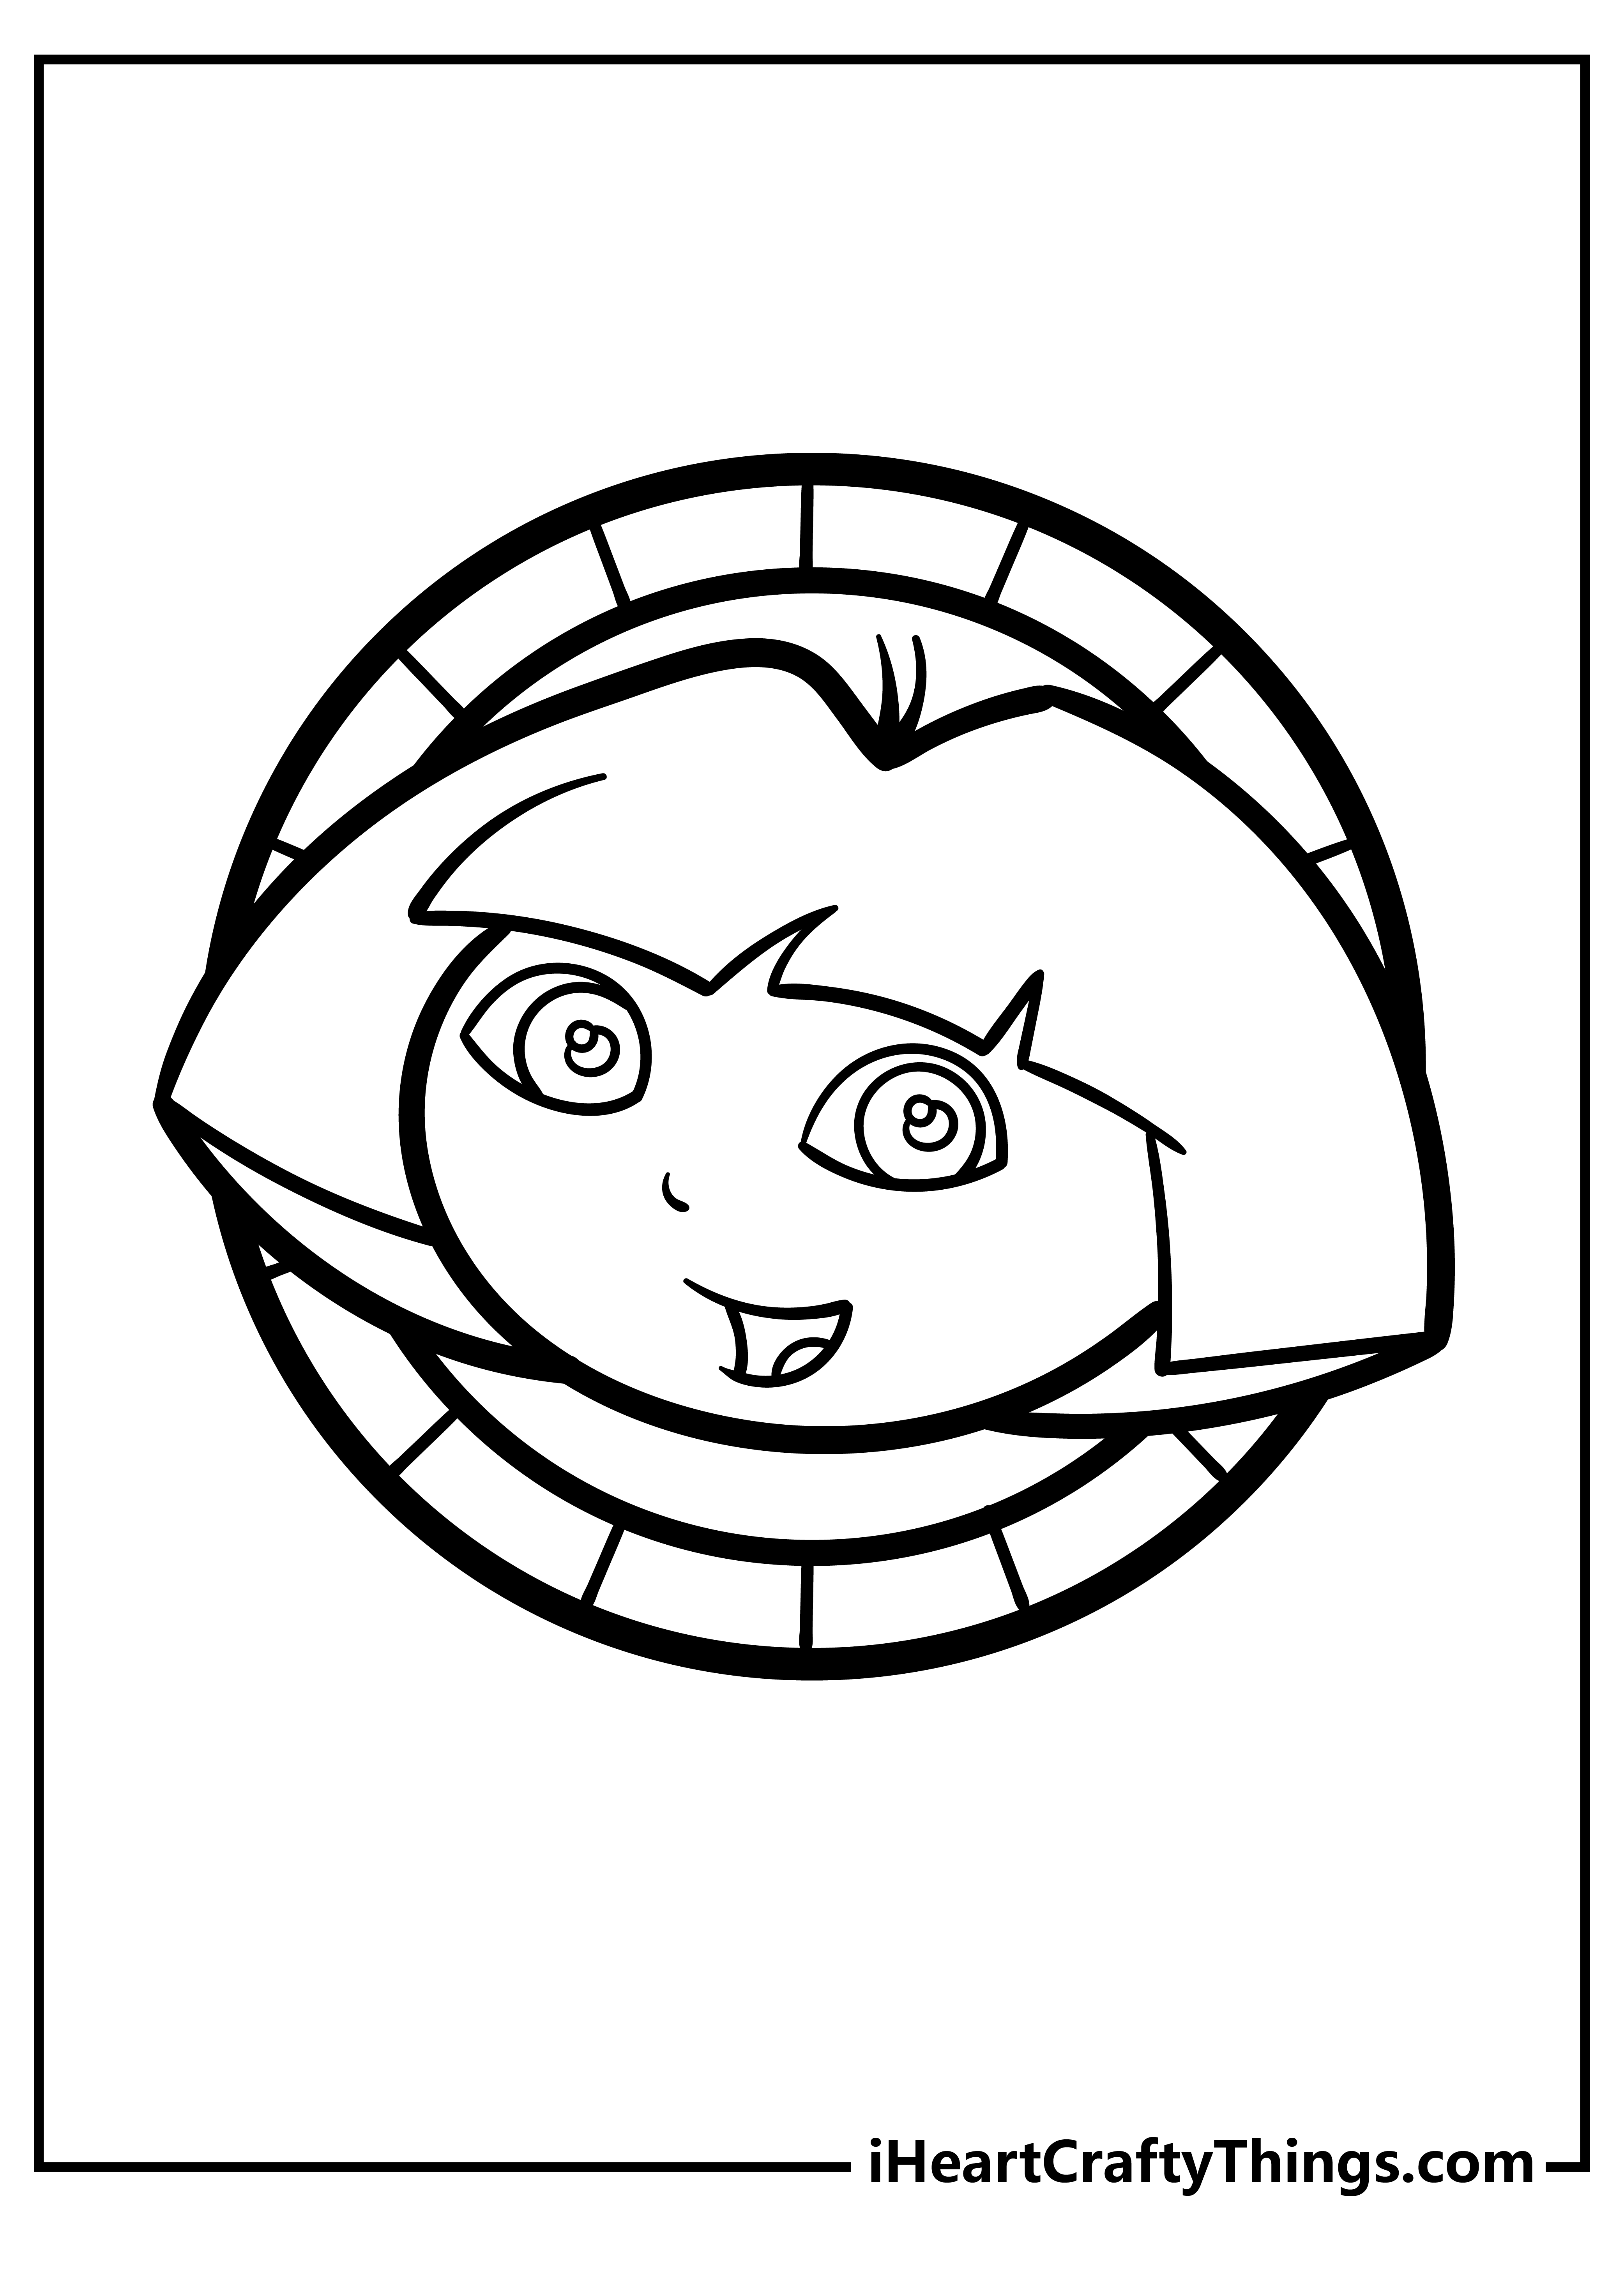 Dora Coloring Book for adults free download